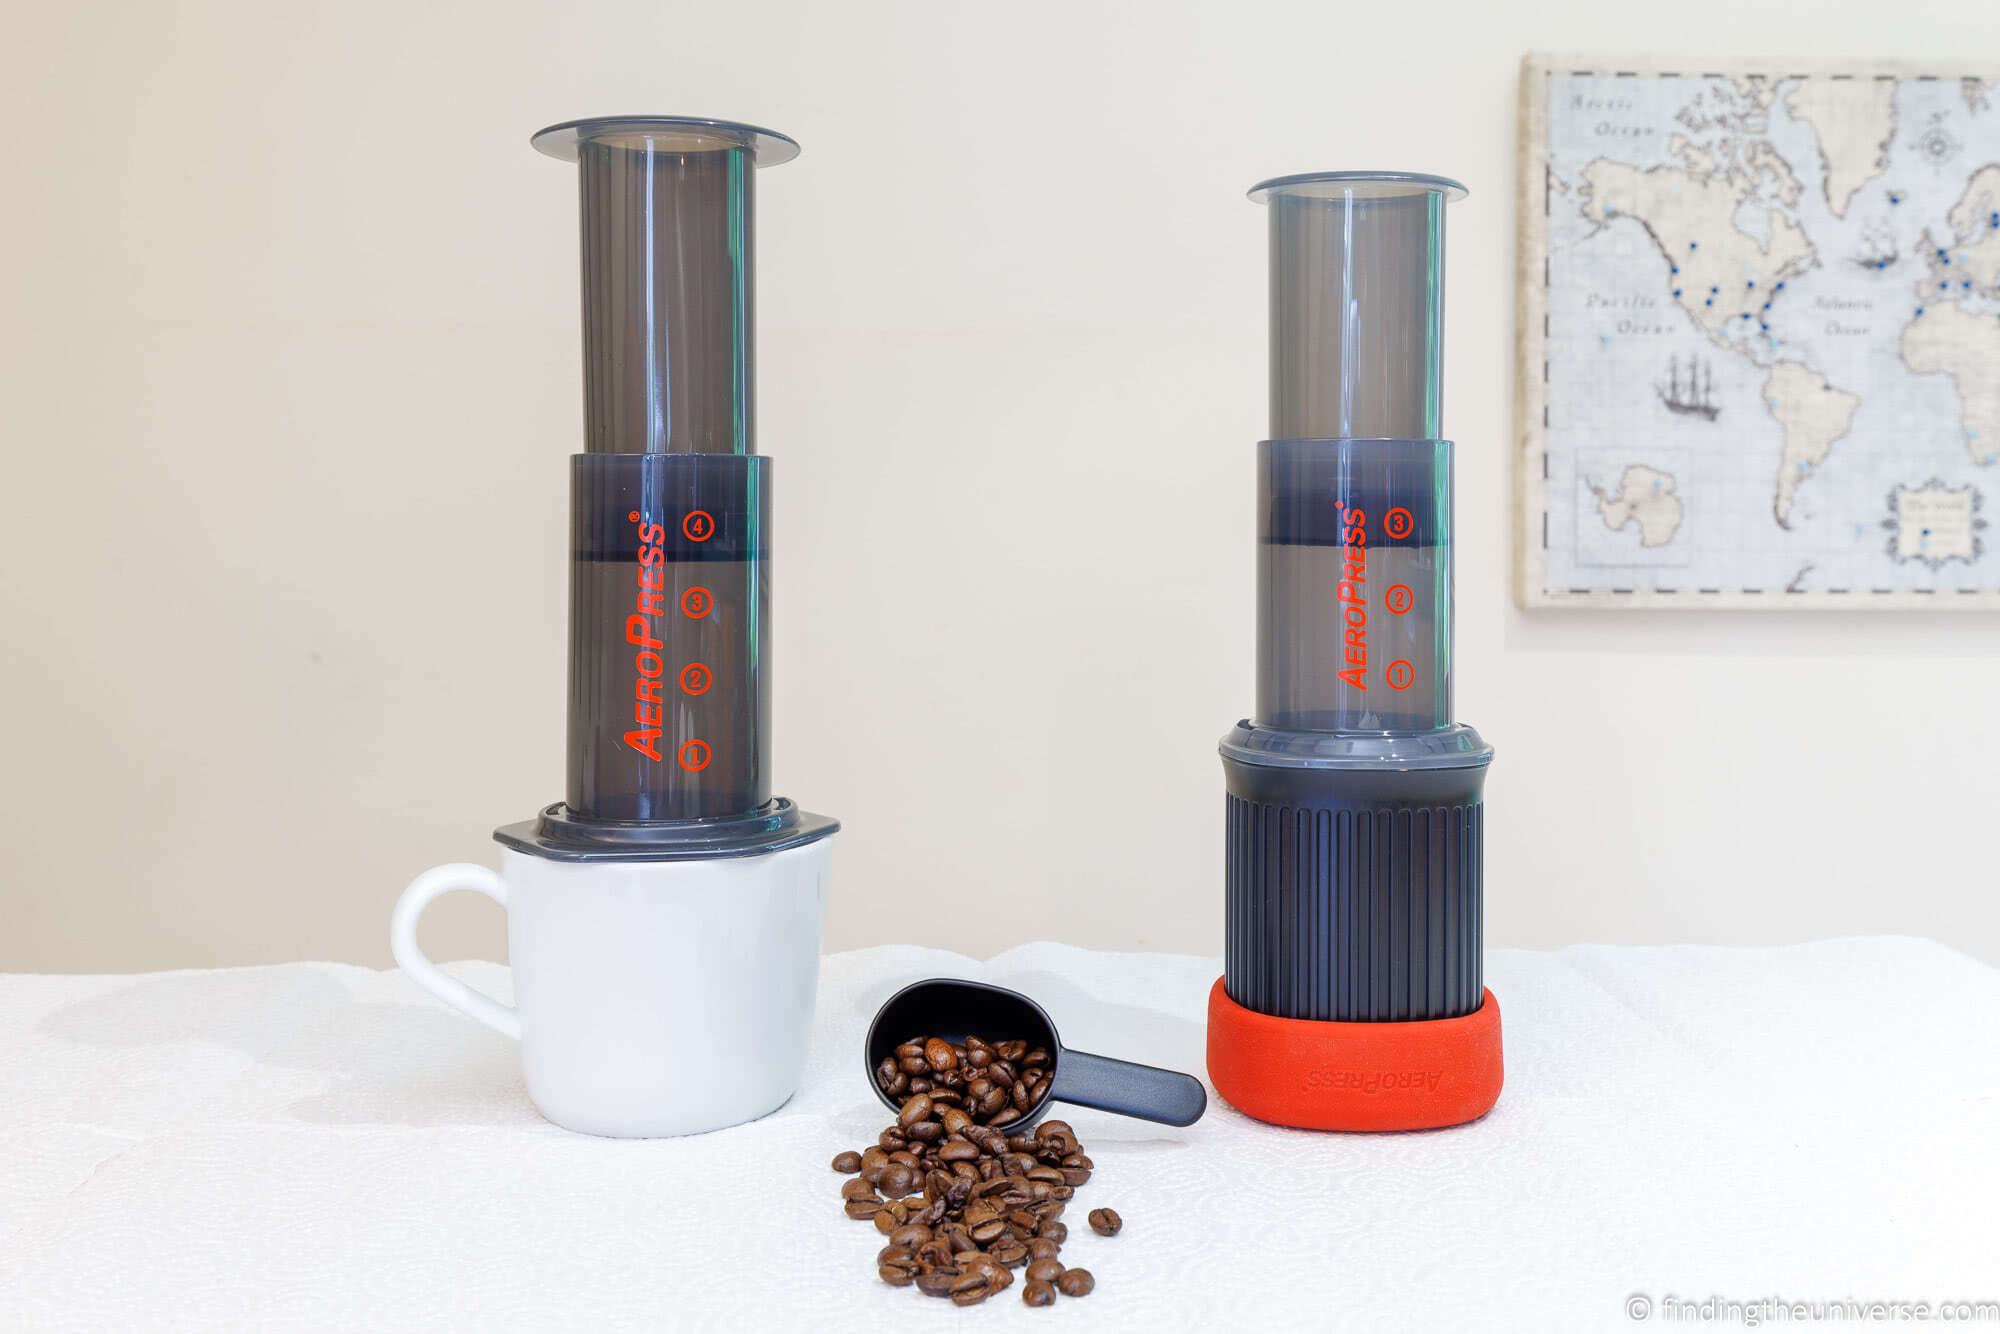 AeroPress Review: Reviewing the AeroPress and AeroPress Go Coffee Makers for Travel